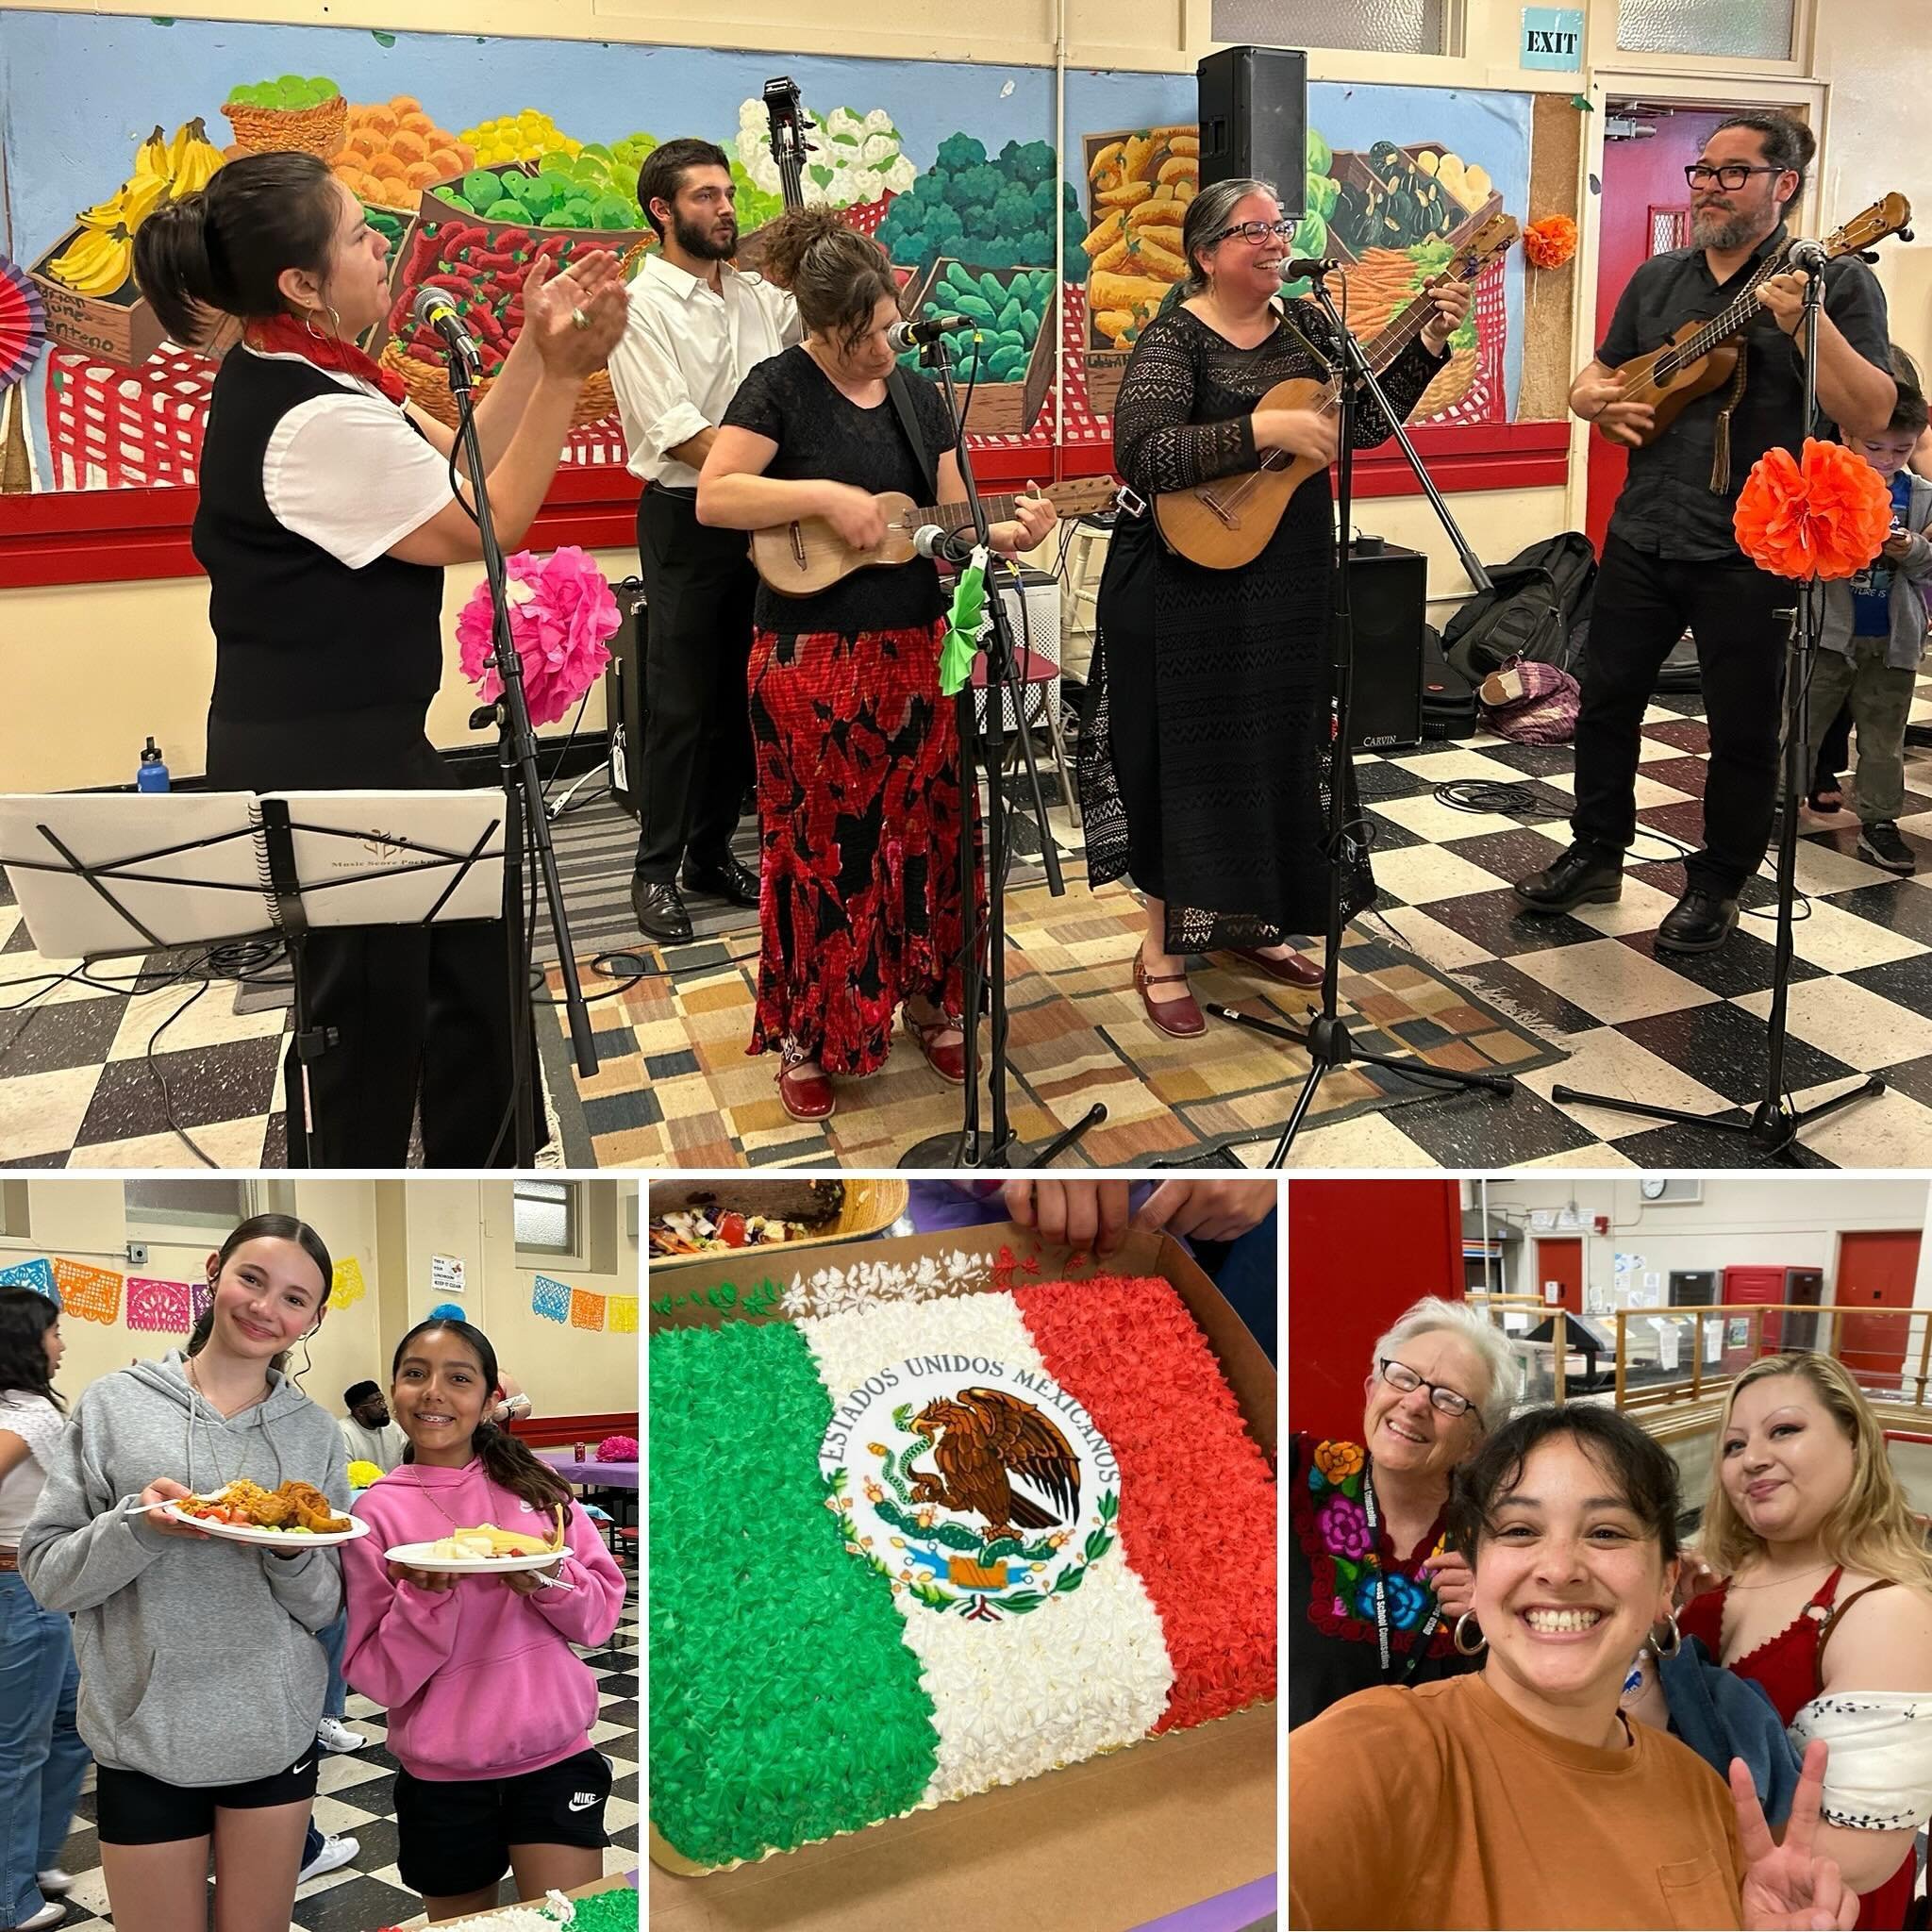 The Latino heritage dinner party was a ton of fun! Thanks to Dia Pa Son for playing Son Jarocho Mexican Foclorico music and to Ms Diaz, mom Sophia, Ms Philips, and everyone else who helped organized it. #Ednabrewer